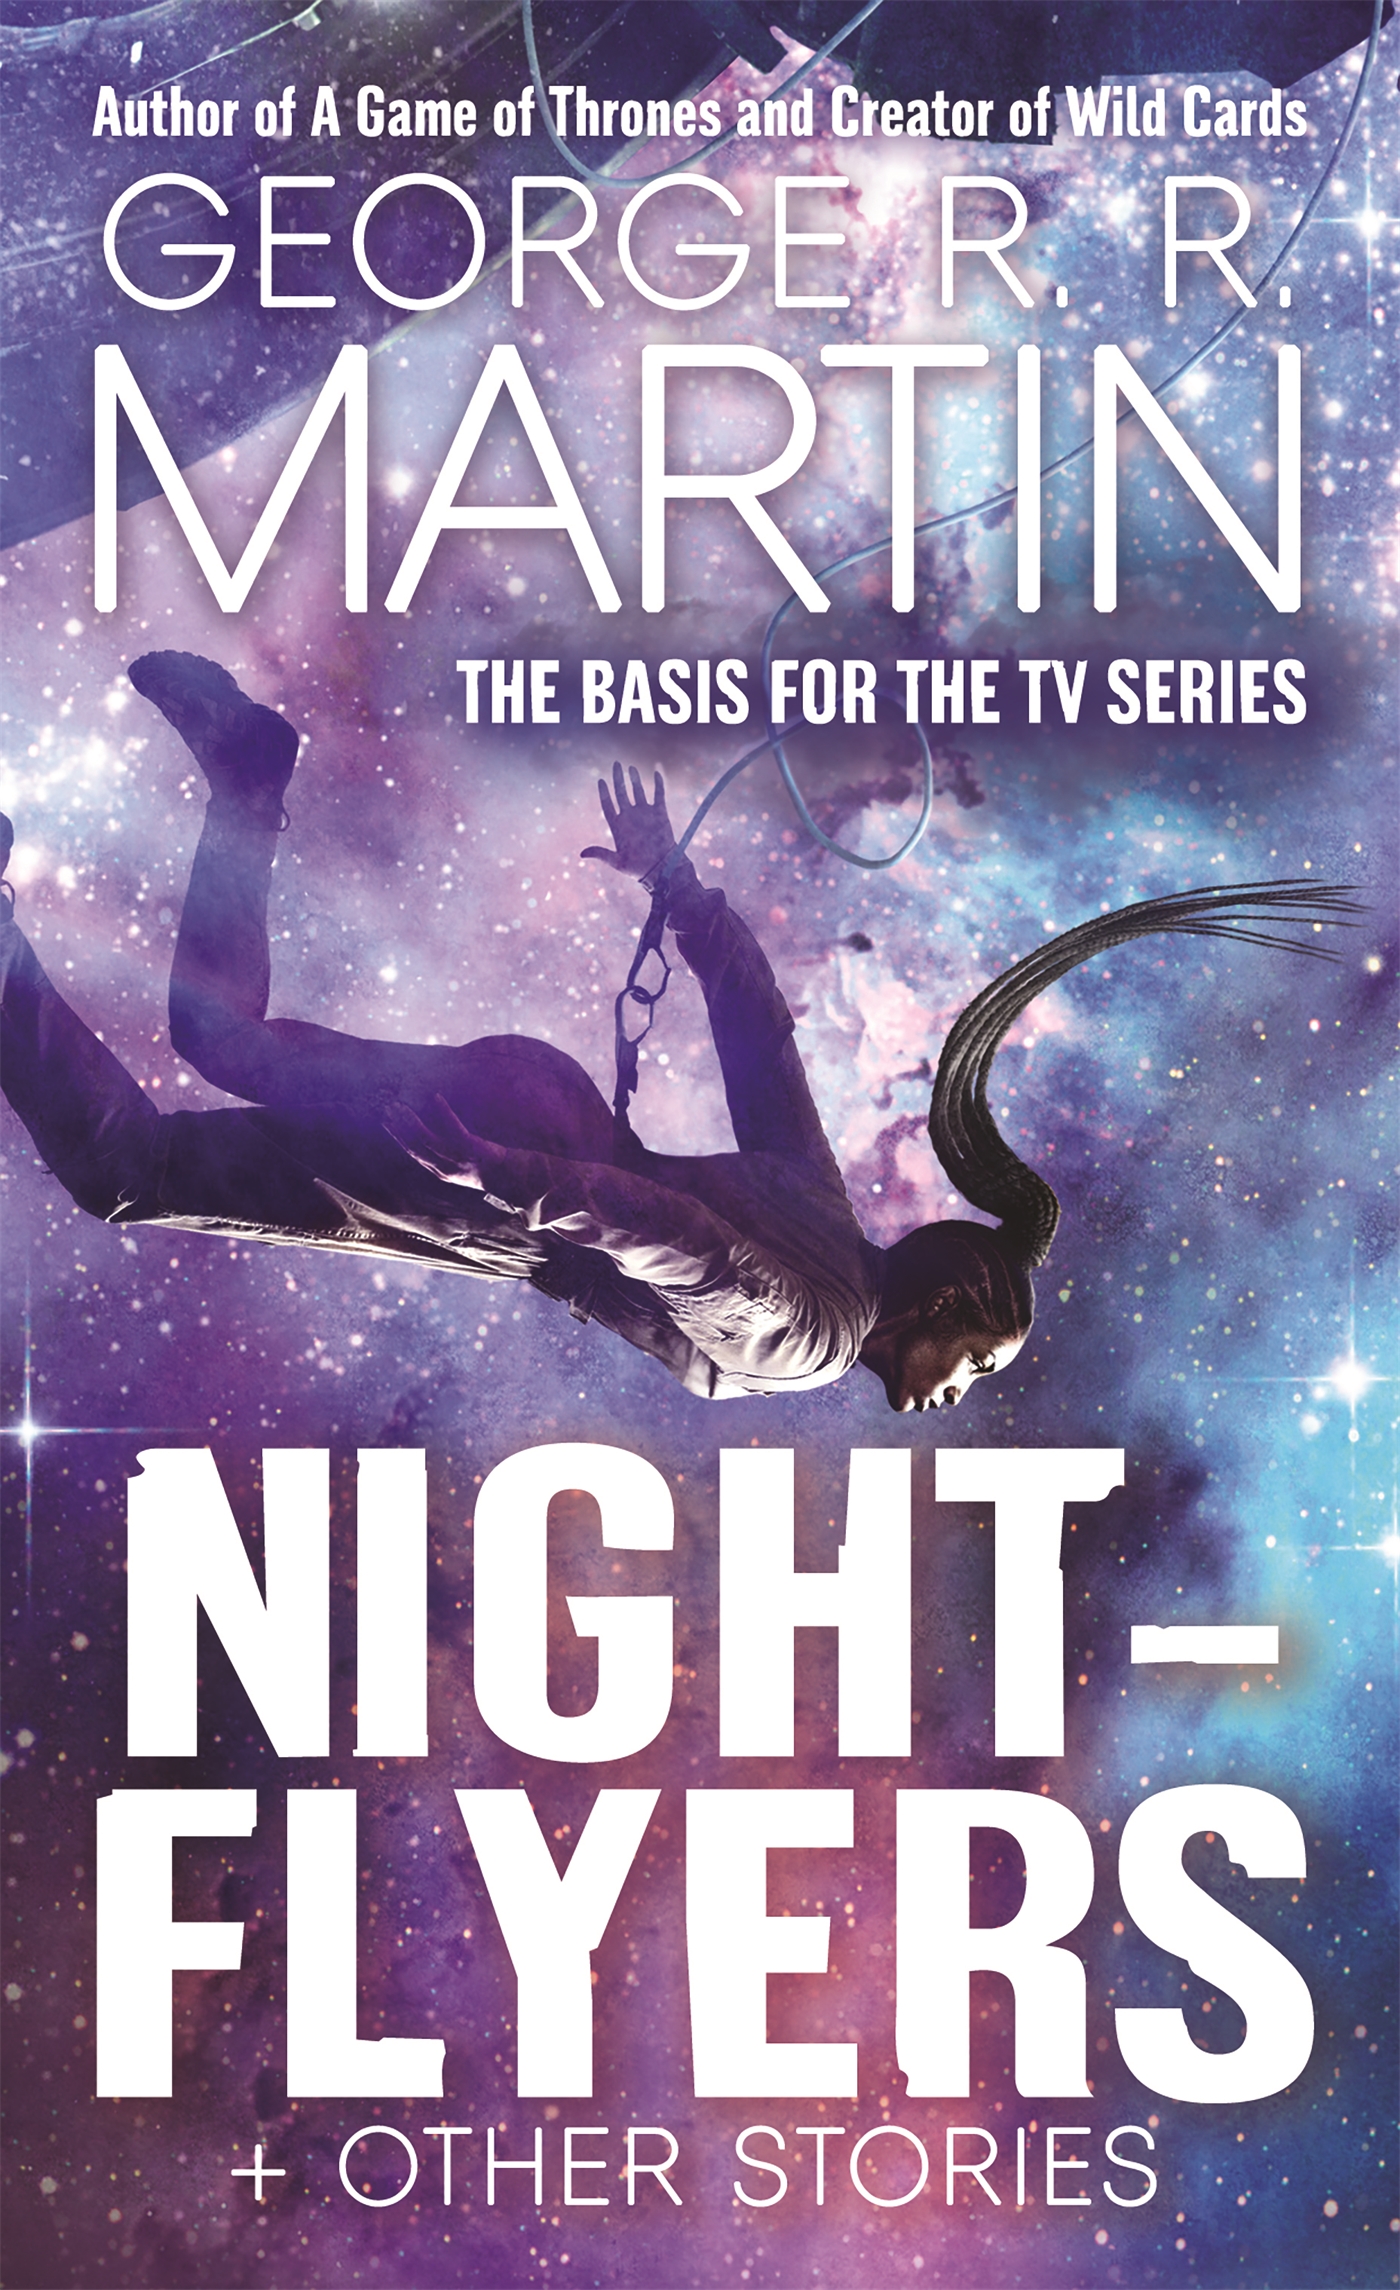 NIGHTFLYERS and OTHER STORIES